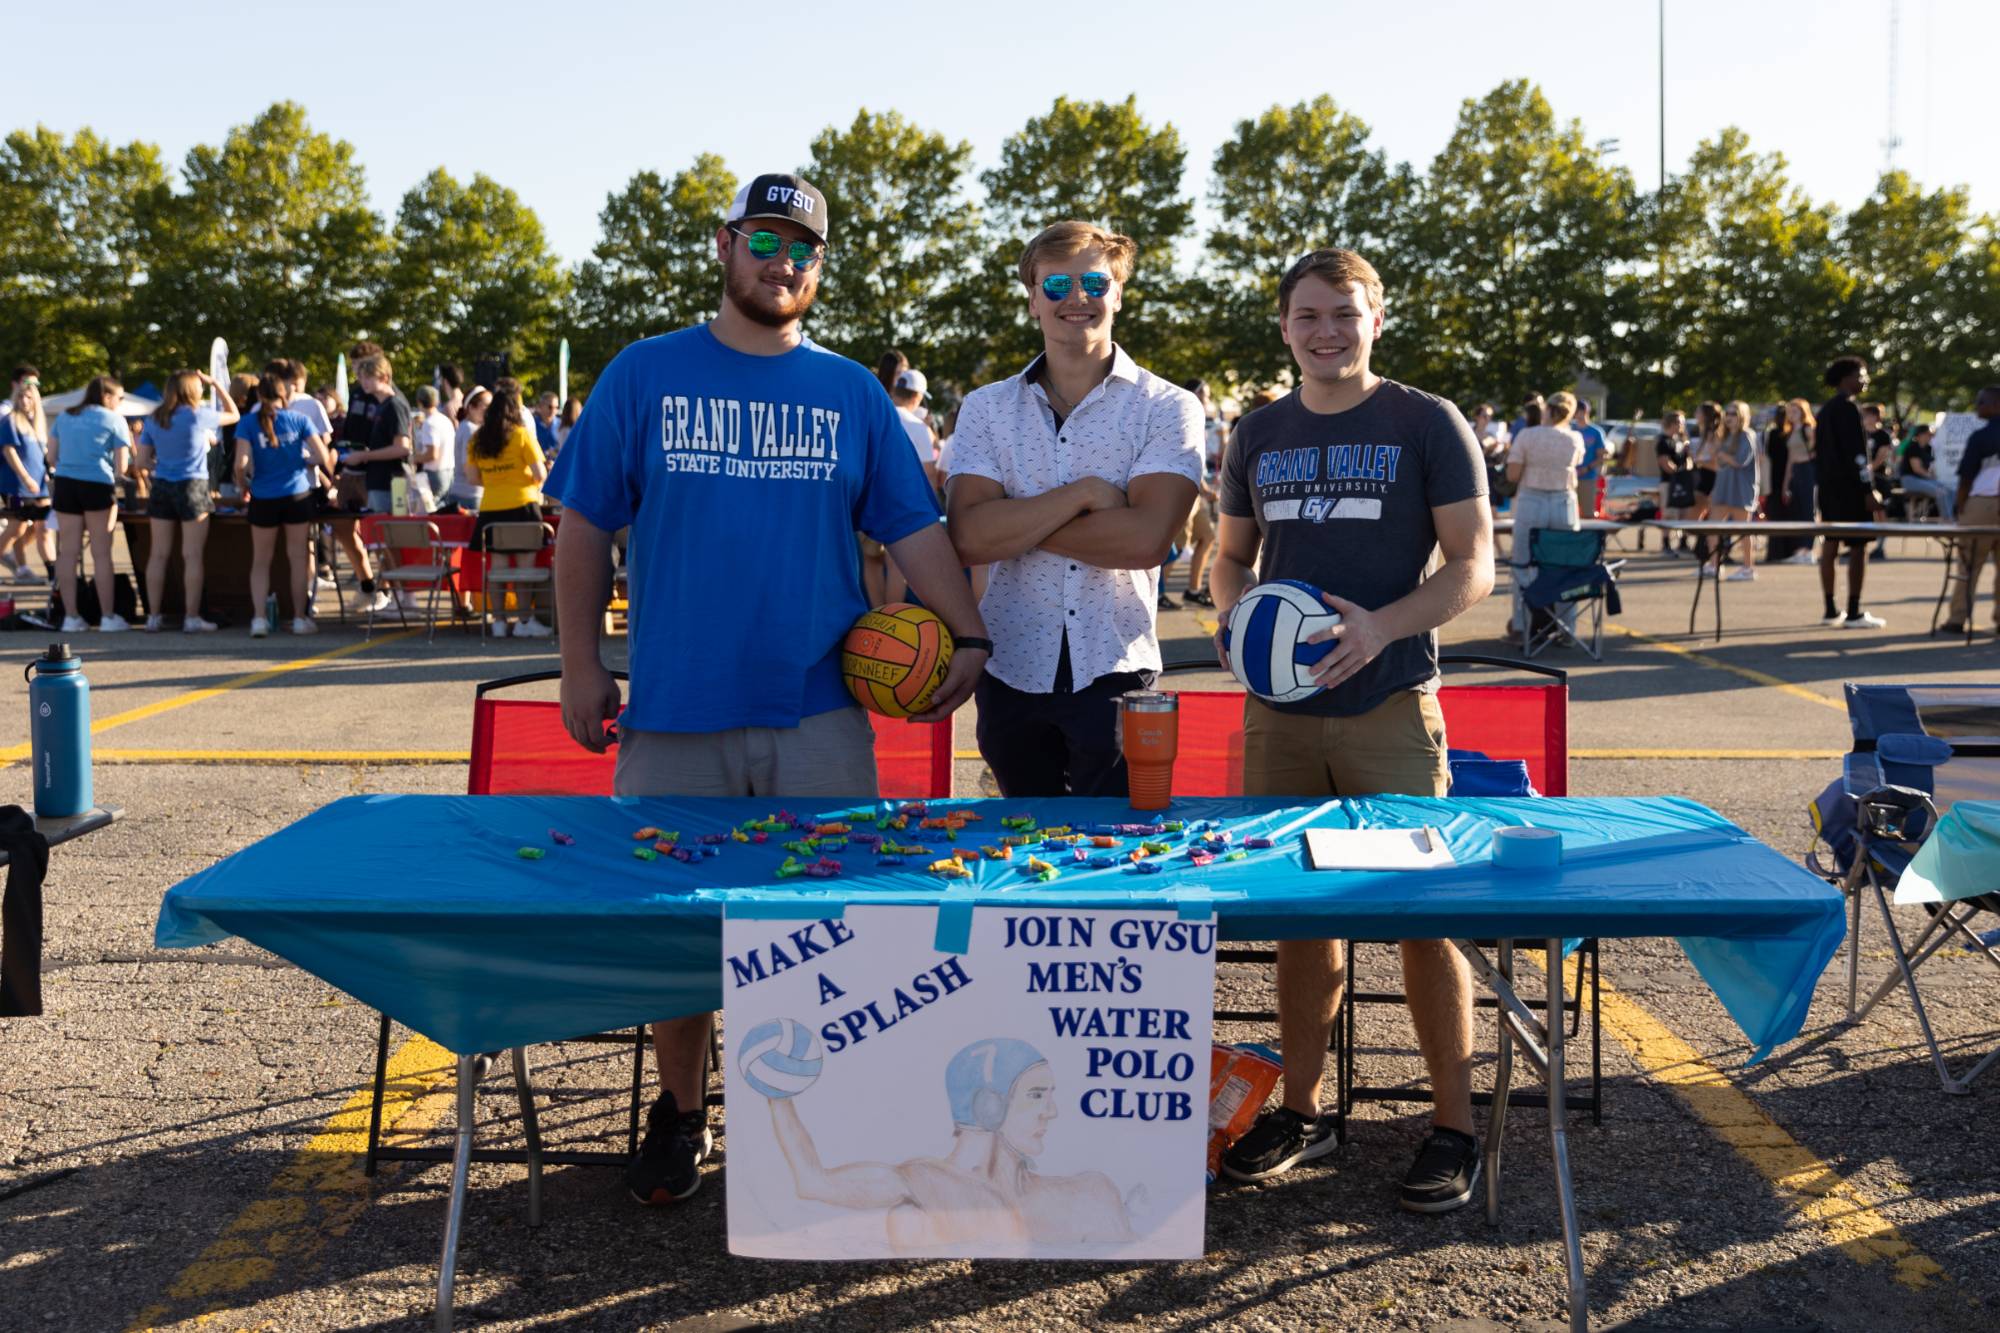 Three GVSU students post in front of a "Join GVSU Men's Water Polo Club" sign at Campus Life Night